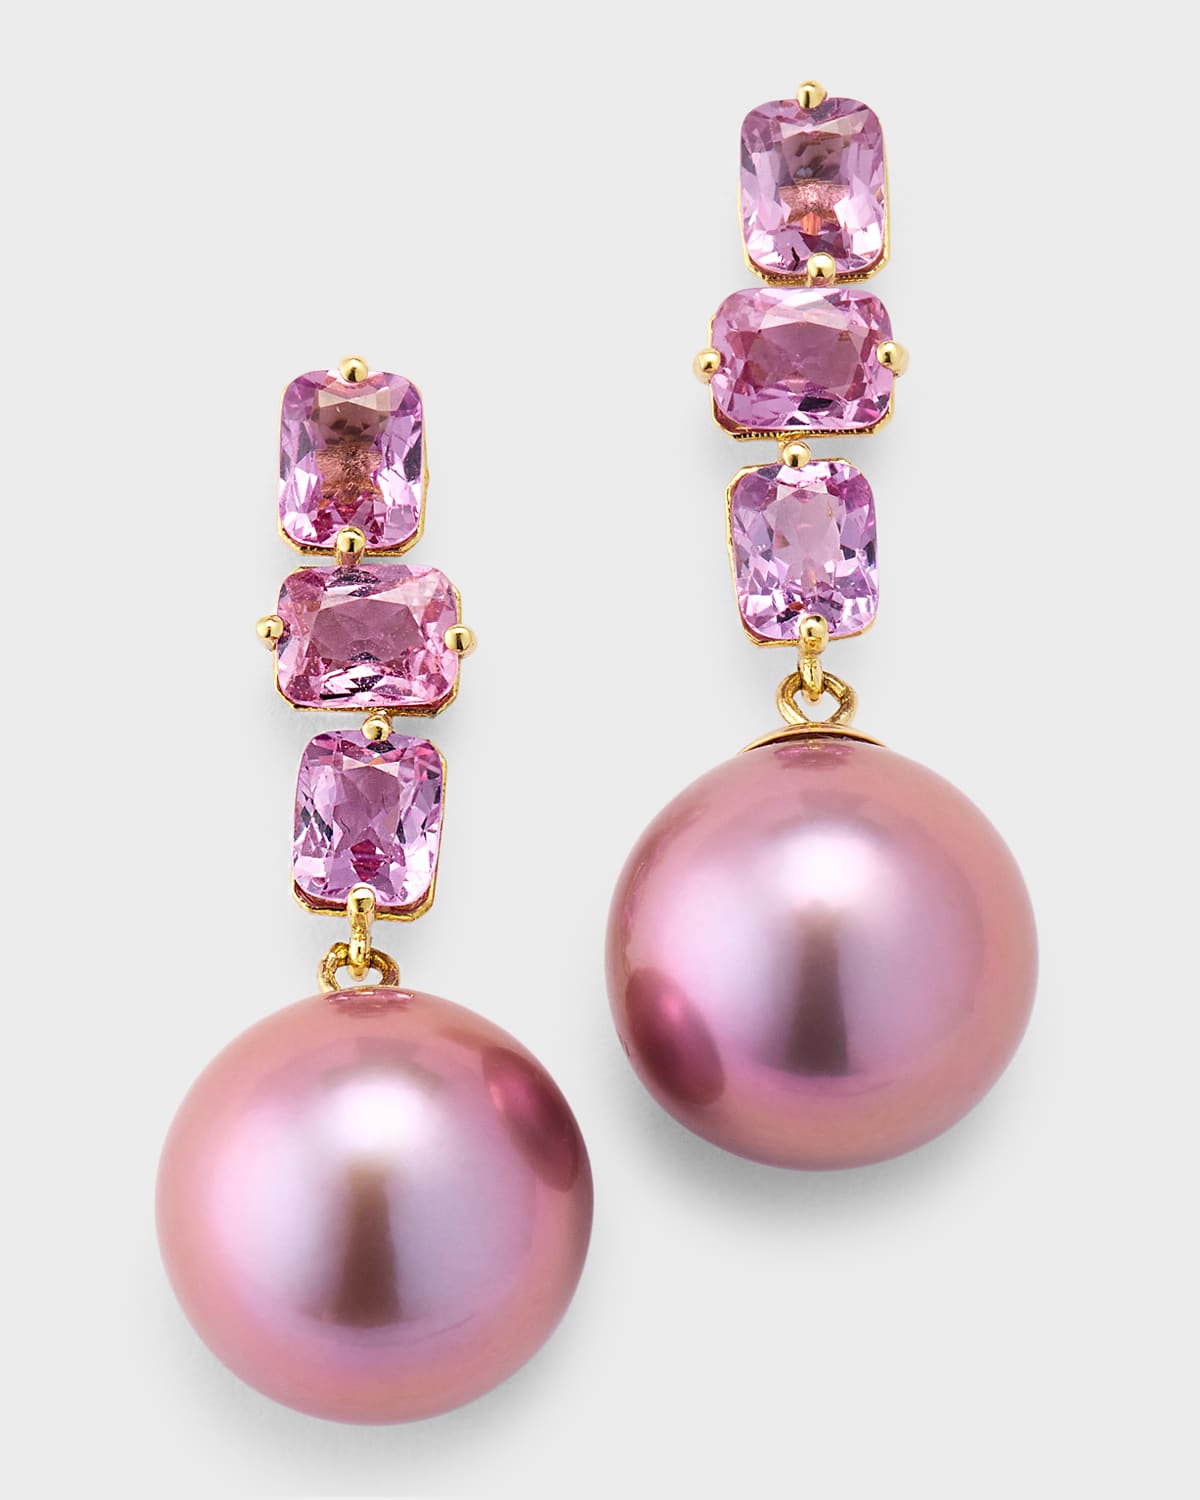 Pearls By Shari 18k Yellow Gold Pink Sapphire And Kasumiga Pearl Earrings In Purple